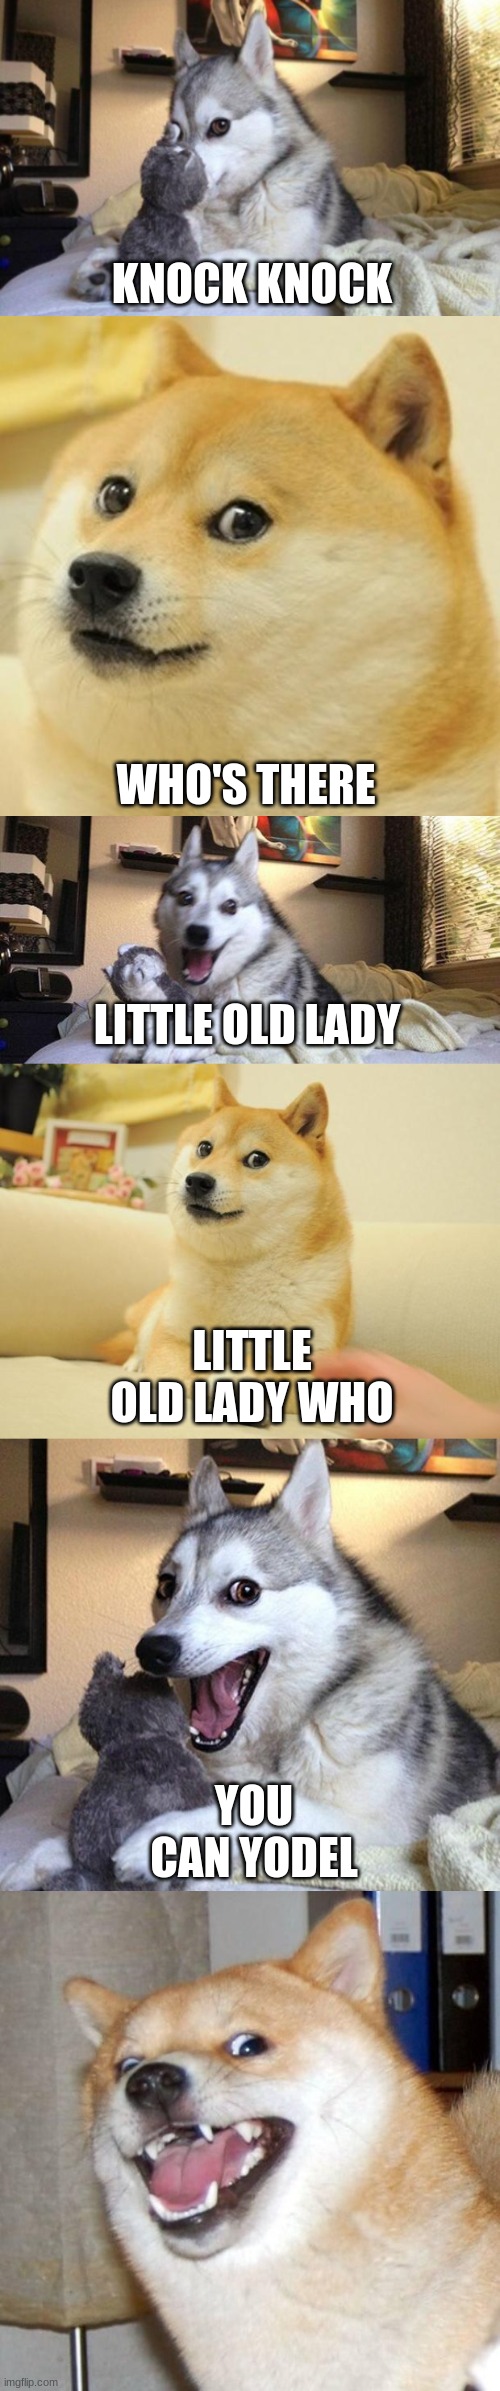 Doge+bad pun dog | KNOCK KNOCK; WHO'S THERE; LITTLE OLD LADY; LITTLE OLD LADY WHO; YOU CAN YODEL | image tagged in memes,doge,bad pun dog,doge 2,knock knock,knock knock dogs | made w/ Imgflip meme maker